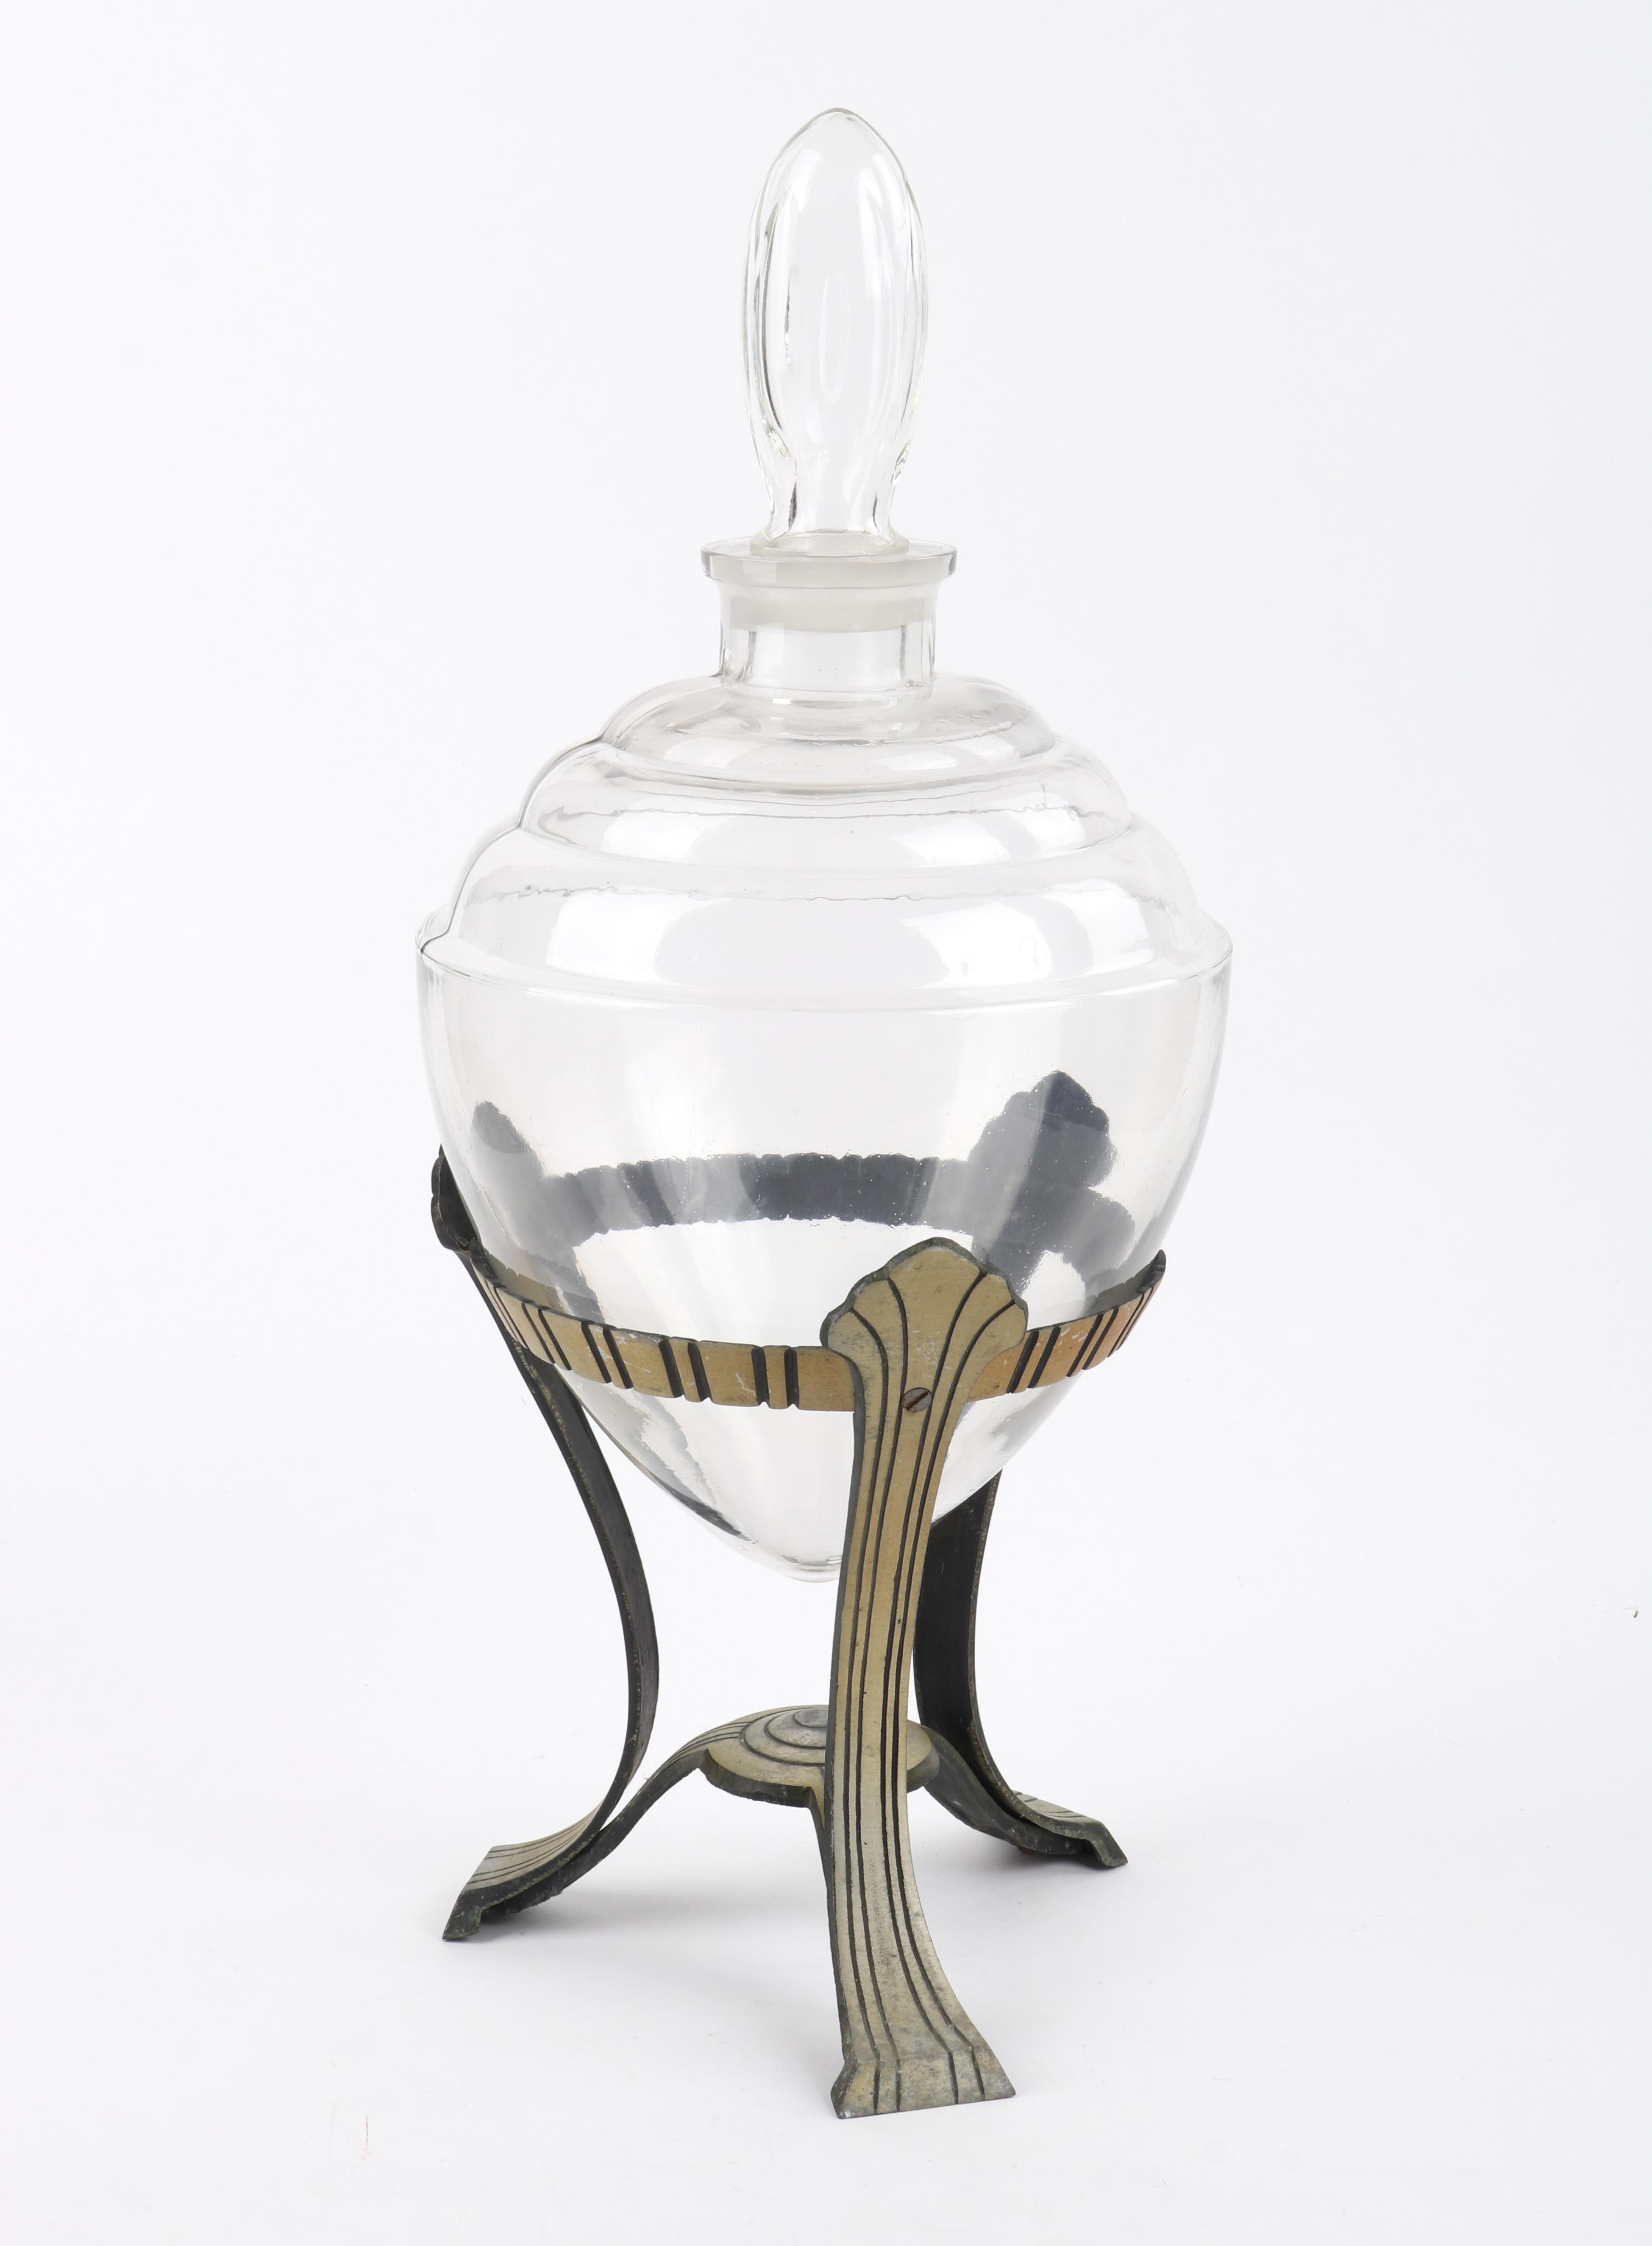 Giant antique heavy art glass urn/factice/apothecary jar, with cap/topper and metal stand. Beautiful Art Deco decorative statement piece that can be used in a variety of ways; to display herbs and botanicals or scent an entire space. Simply fill the